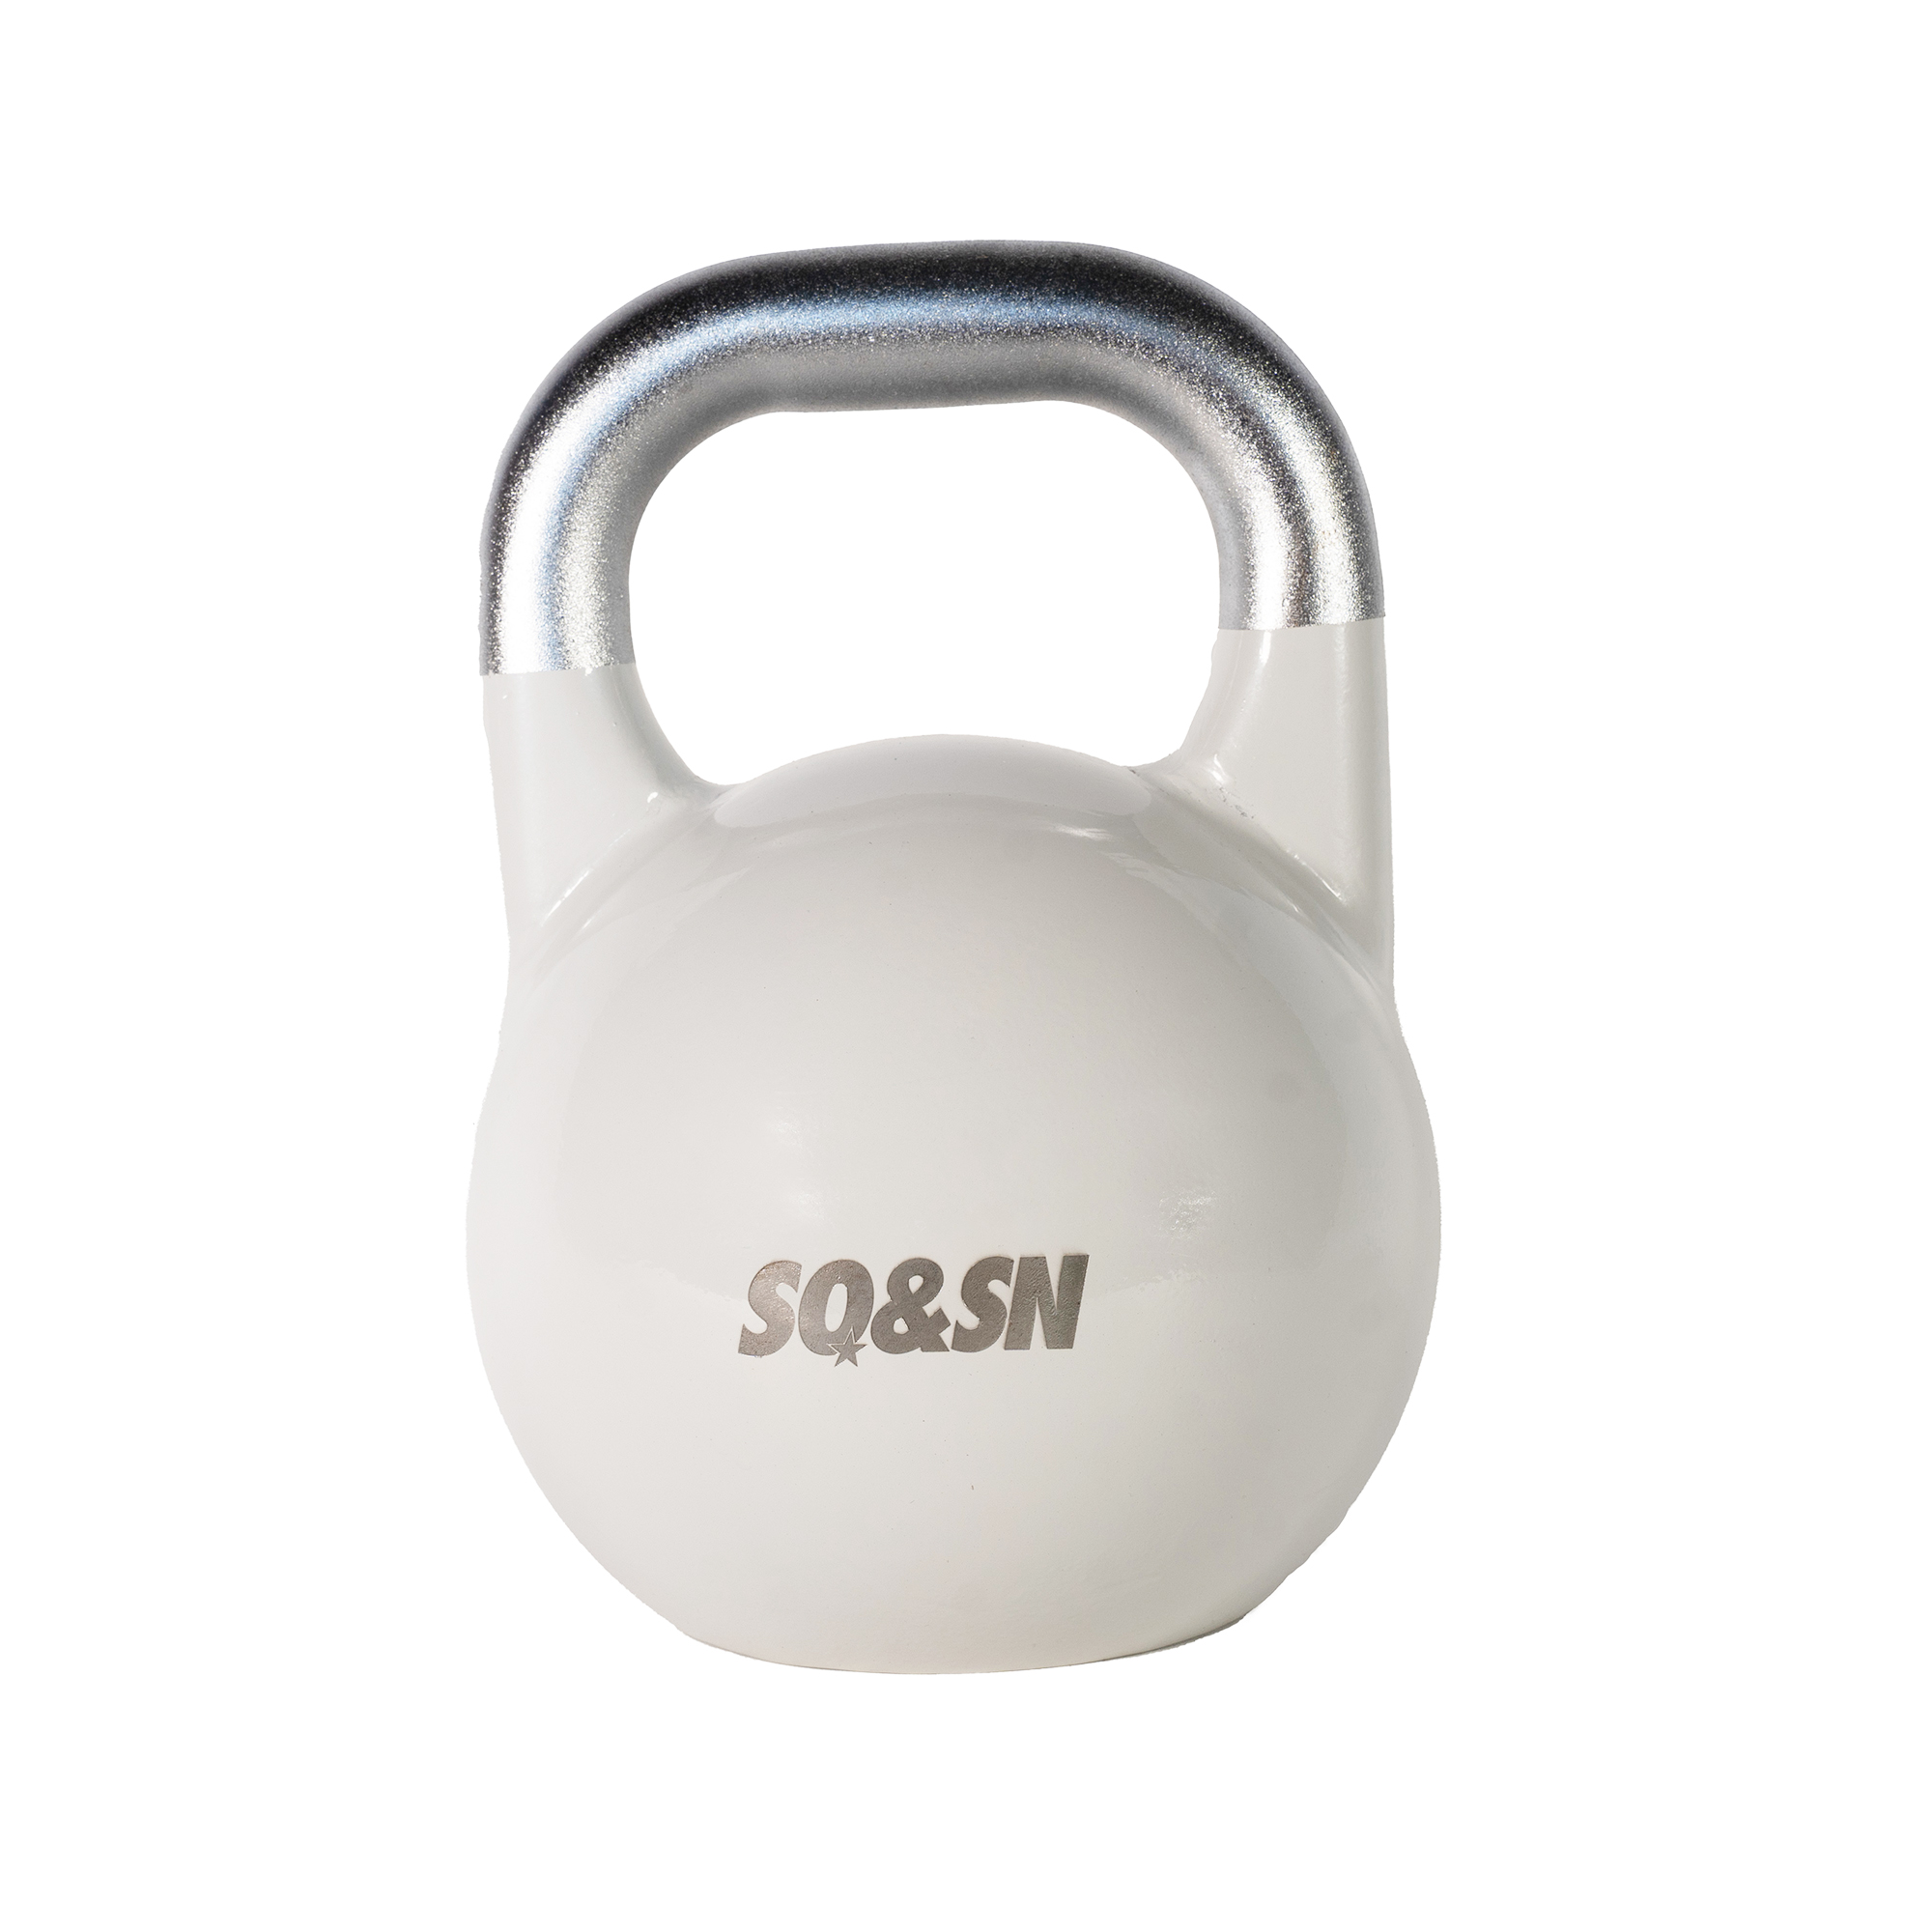 SQ&SN Competition Kettlebell 4 kg – Demo